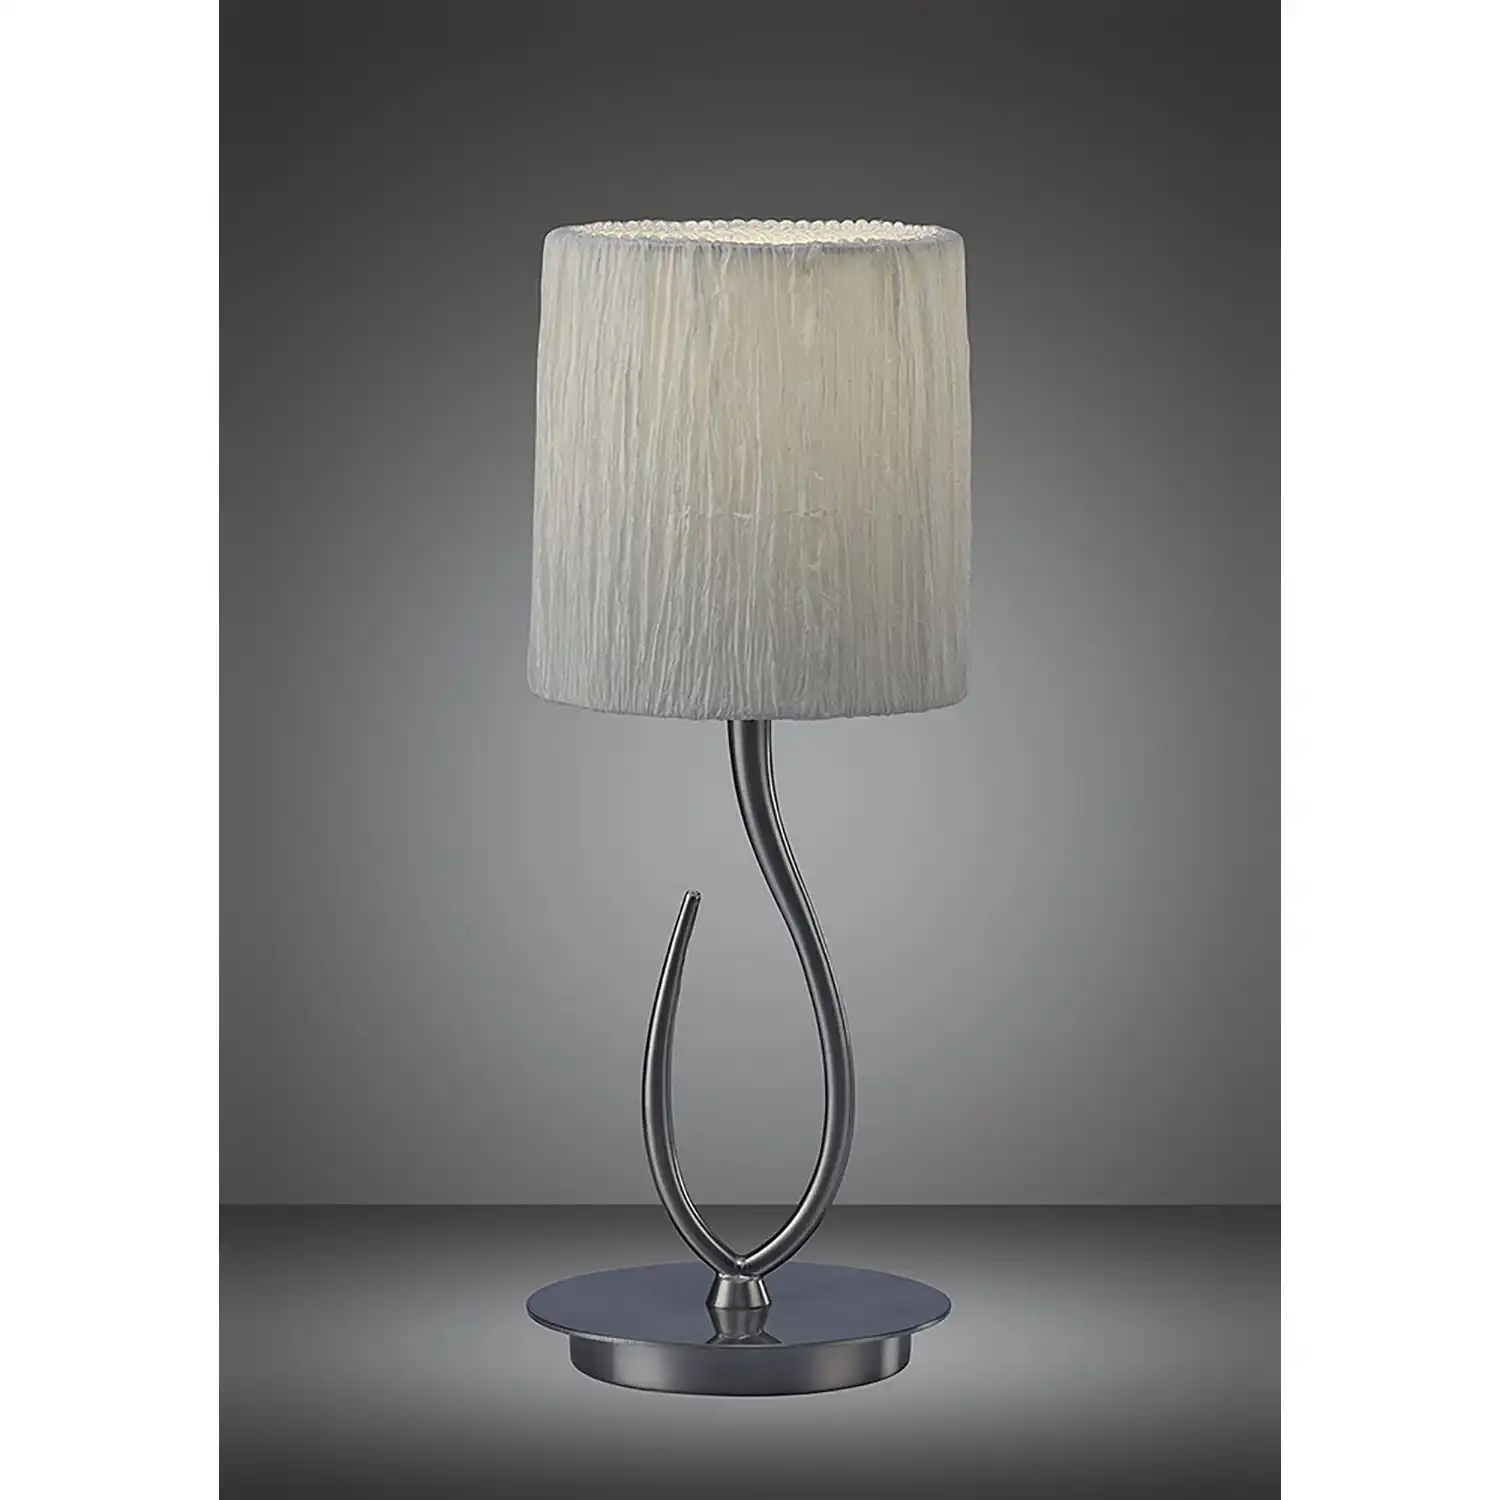 Lua Table Lamp 1 Light E27, Satin Nickel Small With White Shade